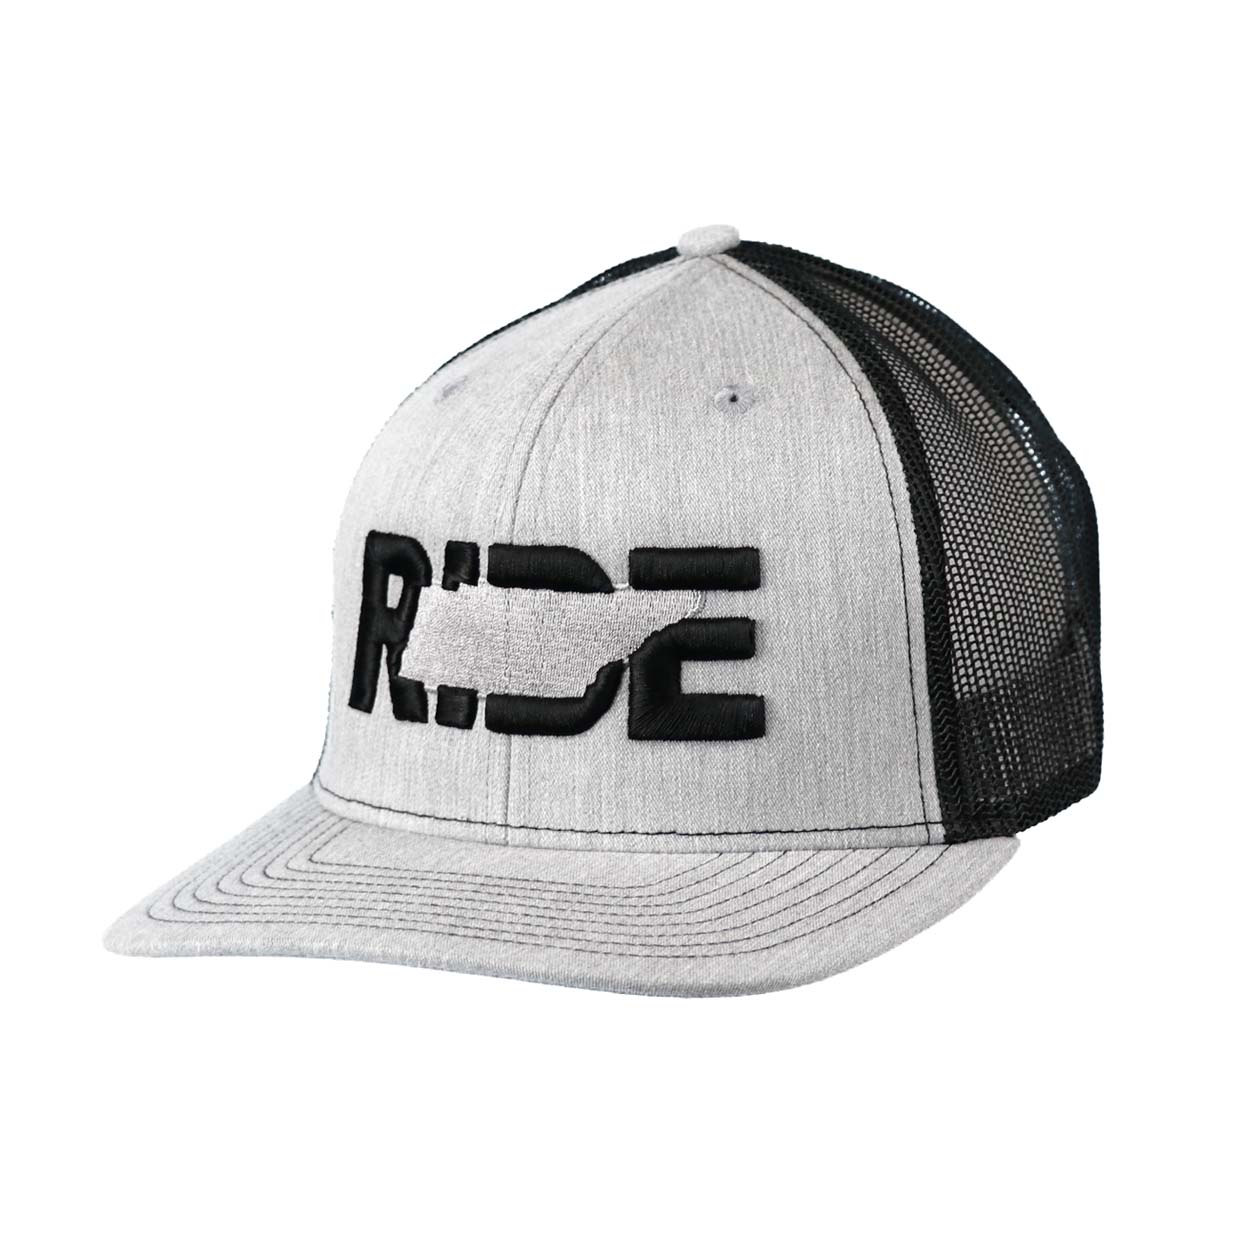 Ride Tennessee Classic Embroidered Snapback Trucker Hat Heather Gray/Black